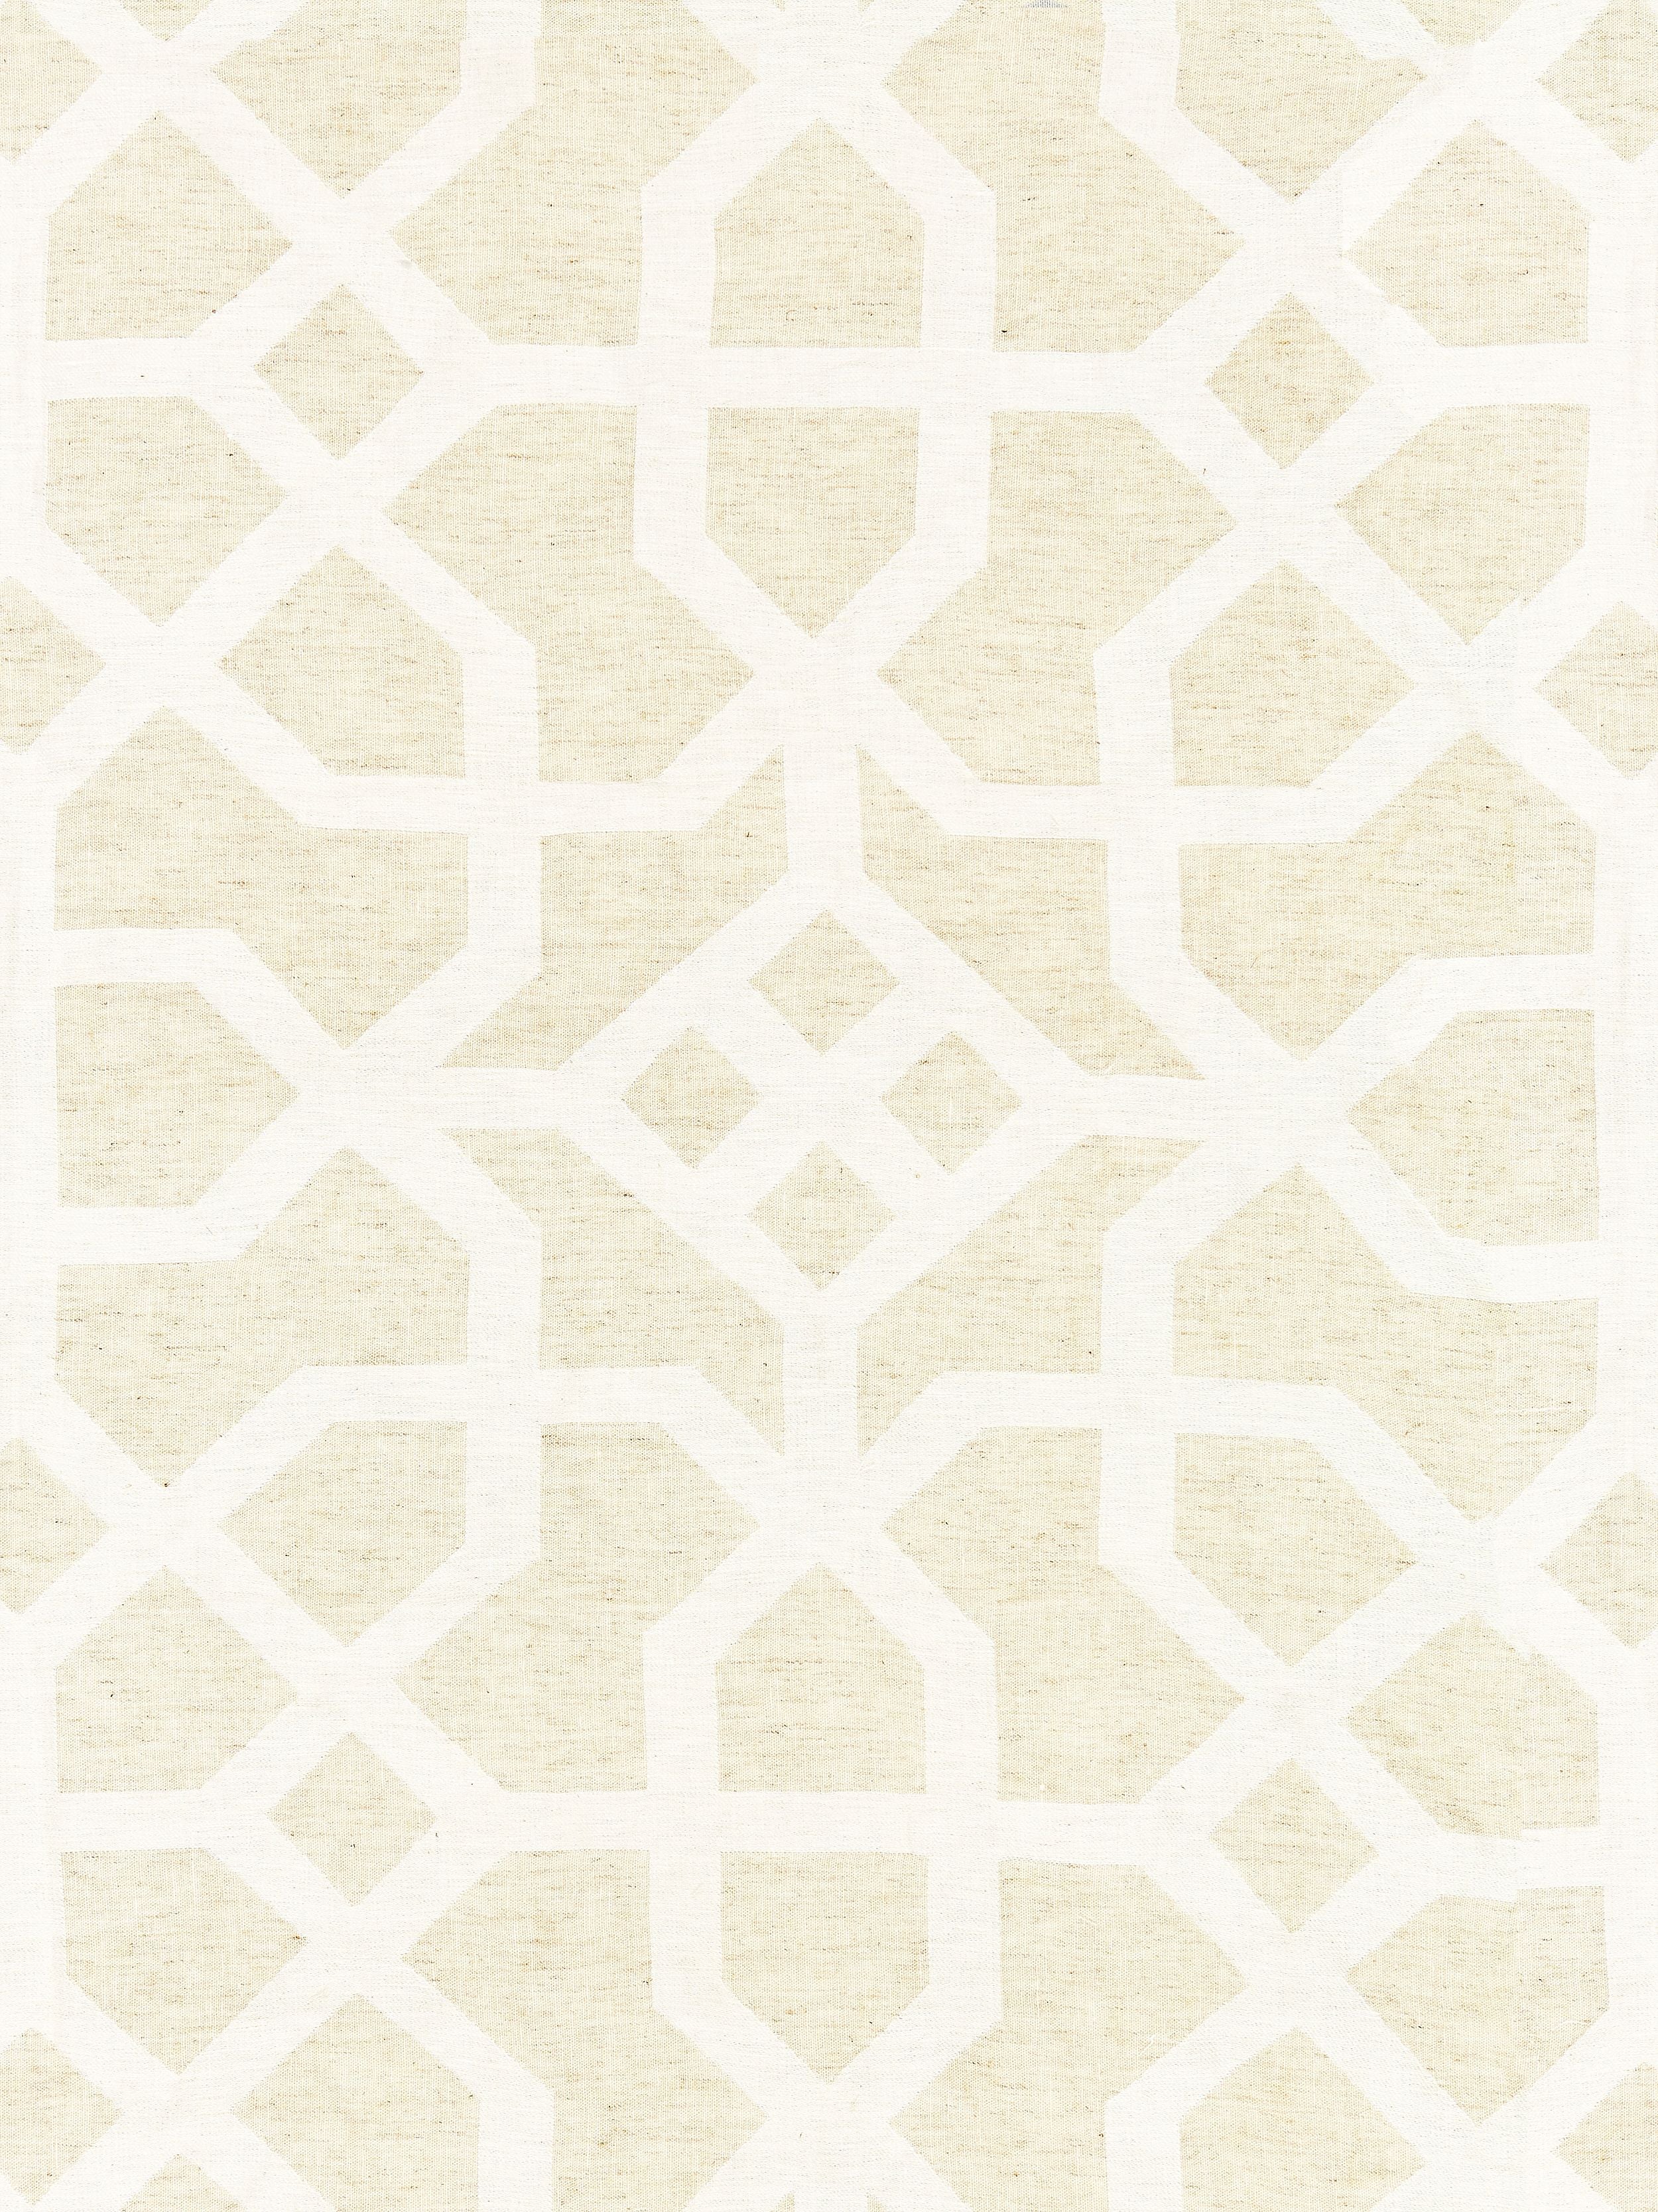 Linen Lattice fabric in natural and ivory color - pattern number SC 000127149 - by Scalamandre in the Scalamandre Fabrics Book 1 collection